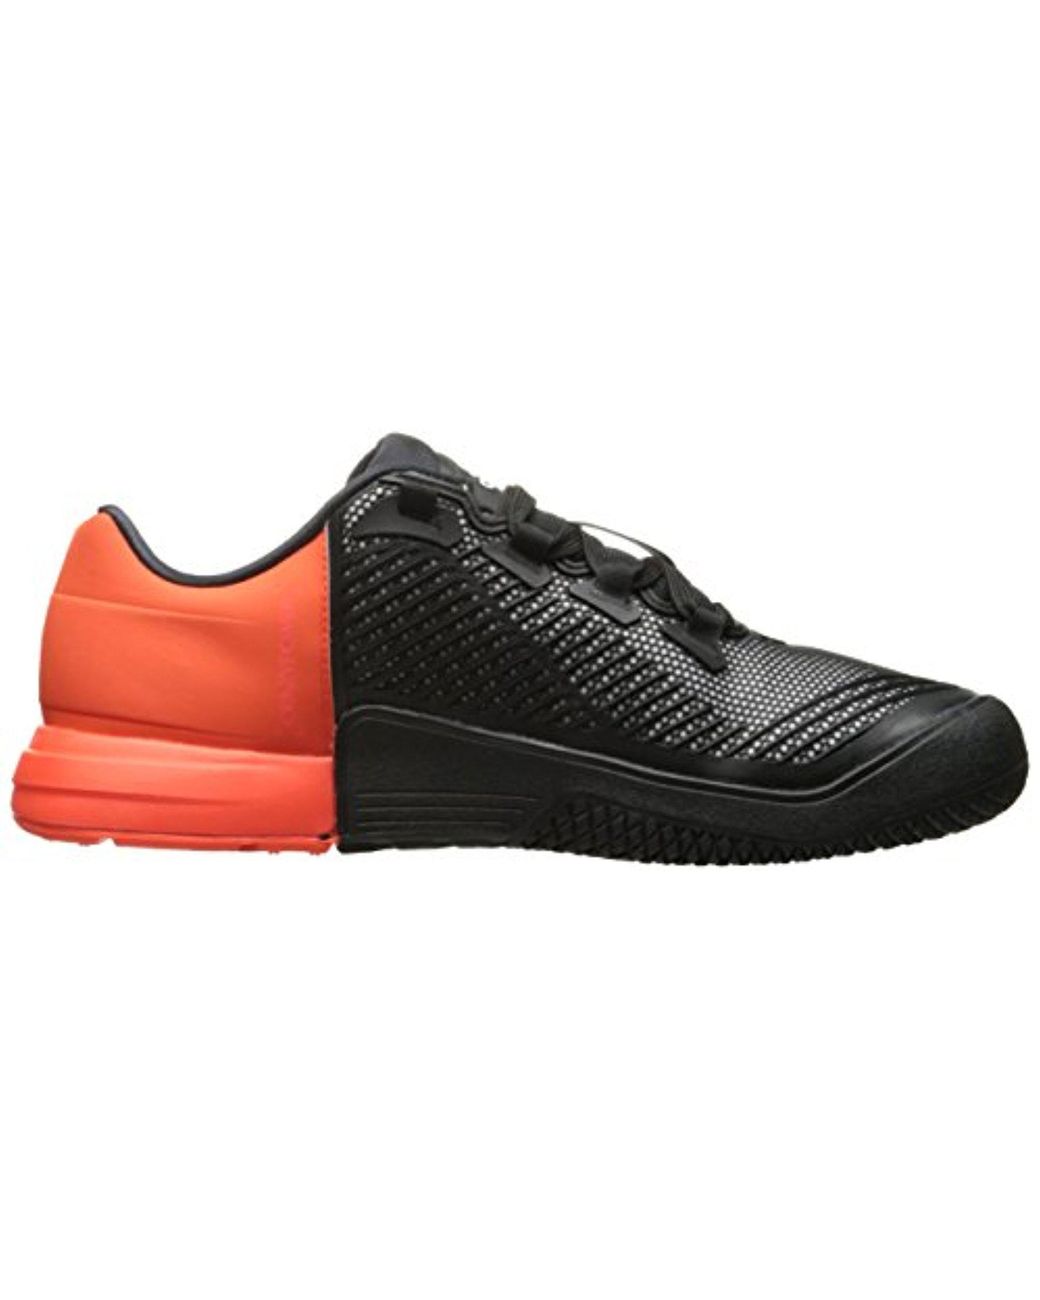 adidas Synthetic Crazypower Tr M Gymnastics Shoes in Black for Men | Lyst